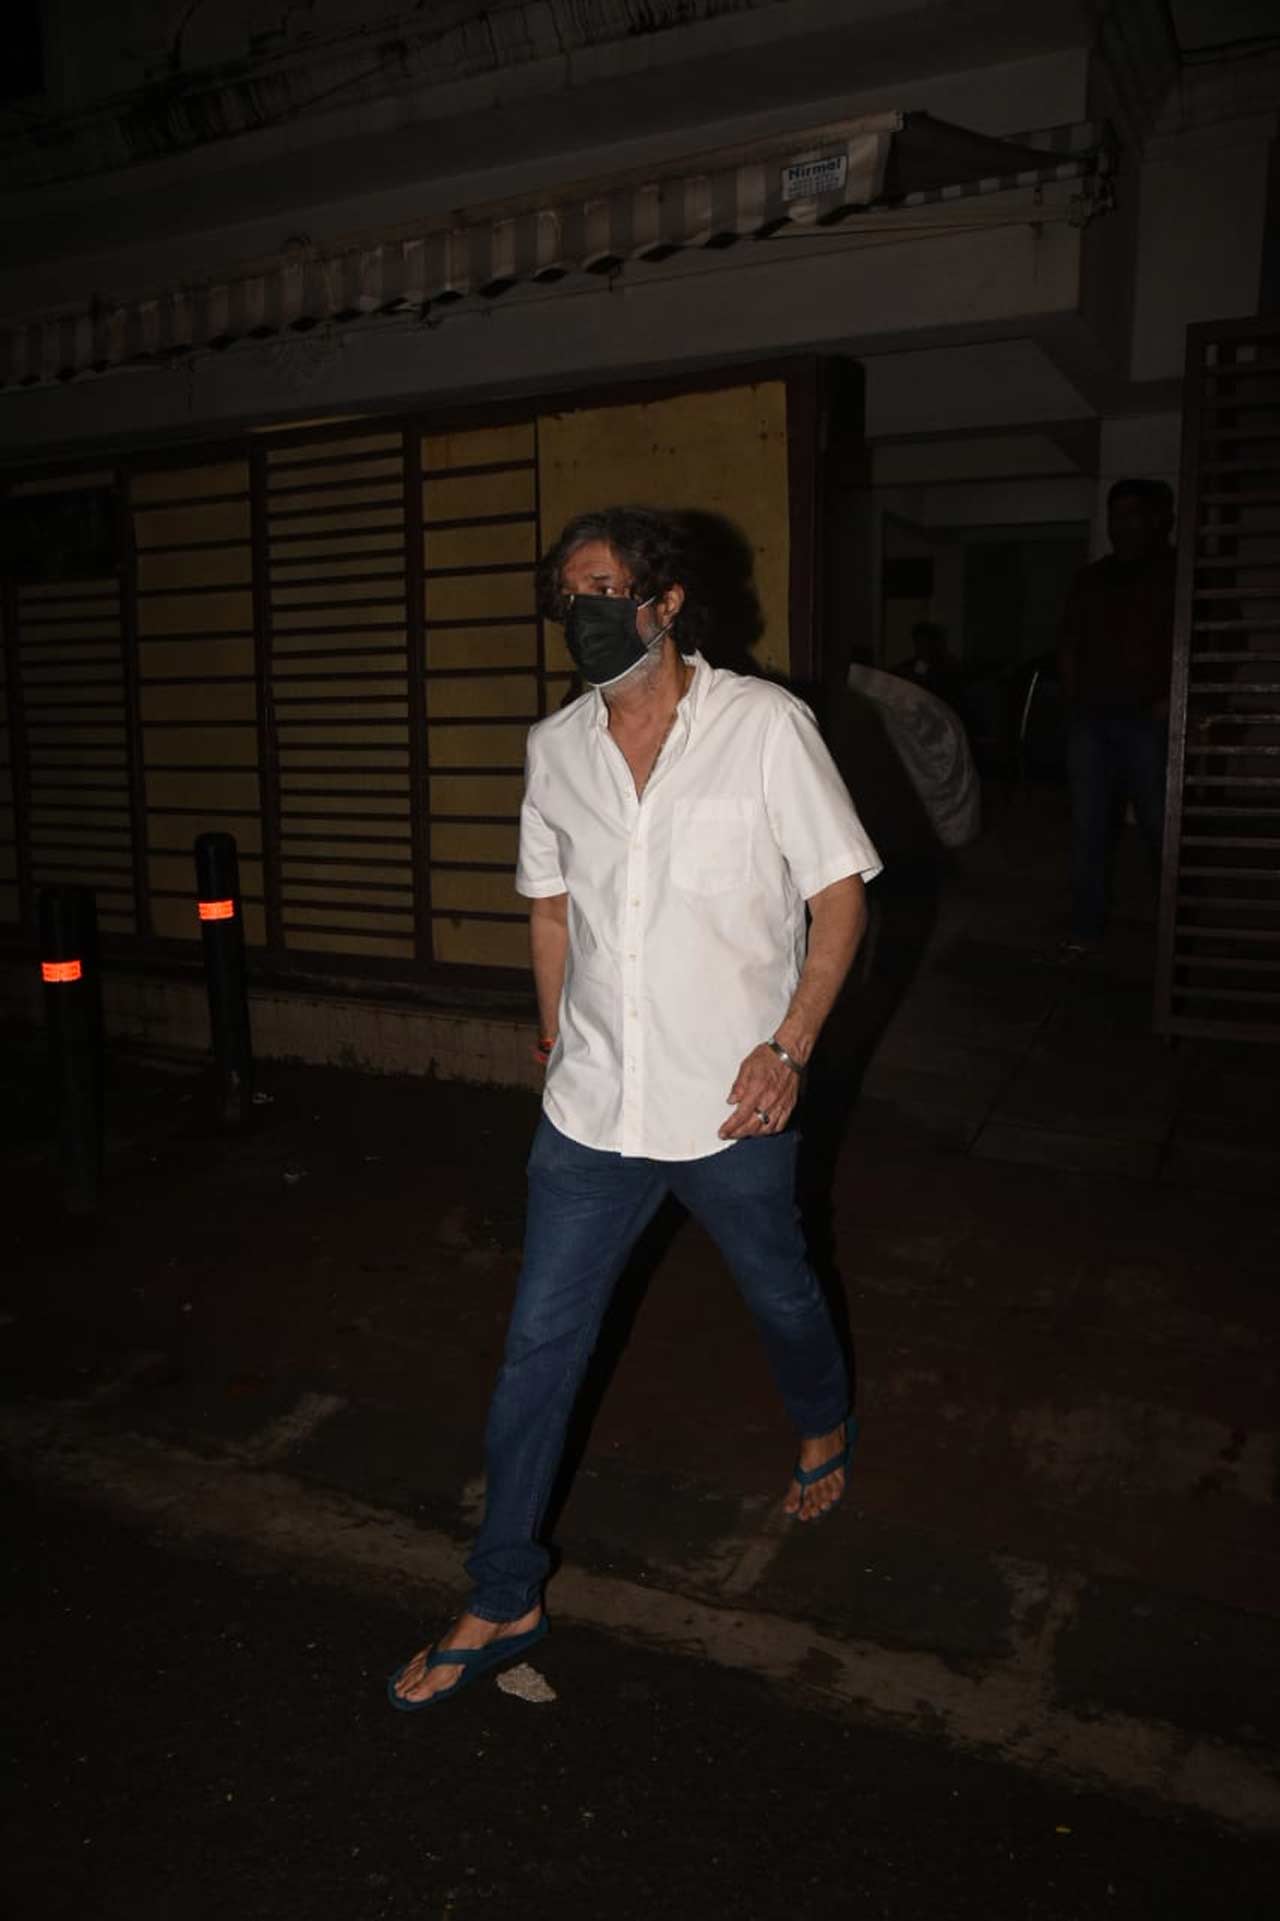 Chunky Panday arrived at film producer Pradeep Guha's residence to offer condolences as he passed away on August 21. Guha, who was in his late 60s, was admitted to Kokilaben Dhirubhai Ambani Hospital. The producer's wife Papia Guha and son Sanket Guha shared the news of his demise in a statement issued to the media. 
 